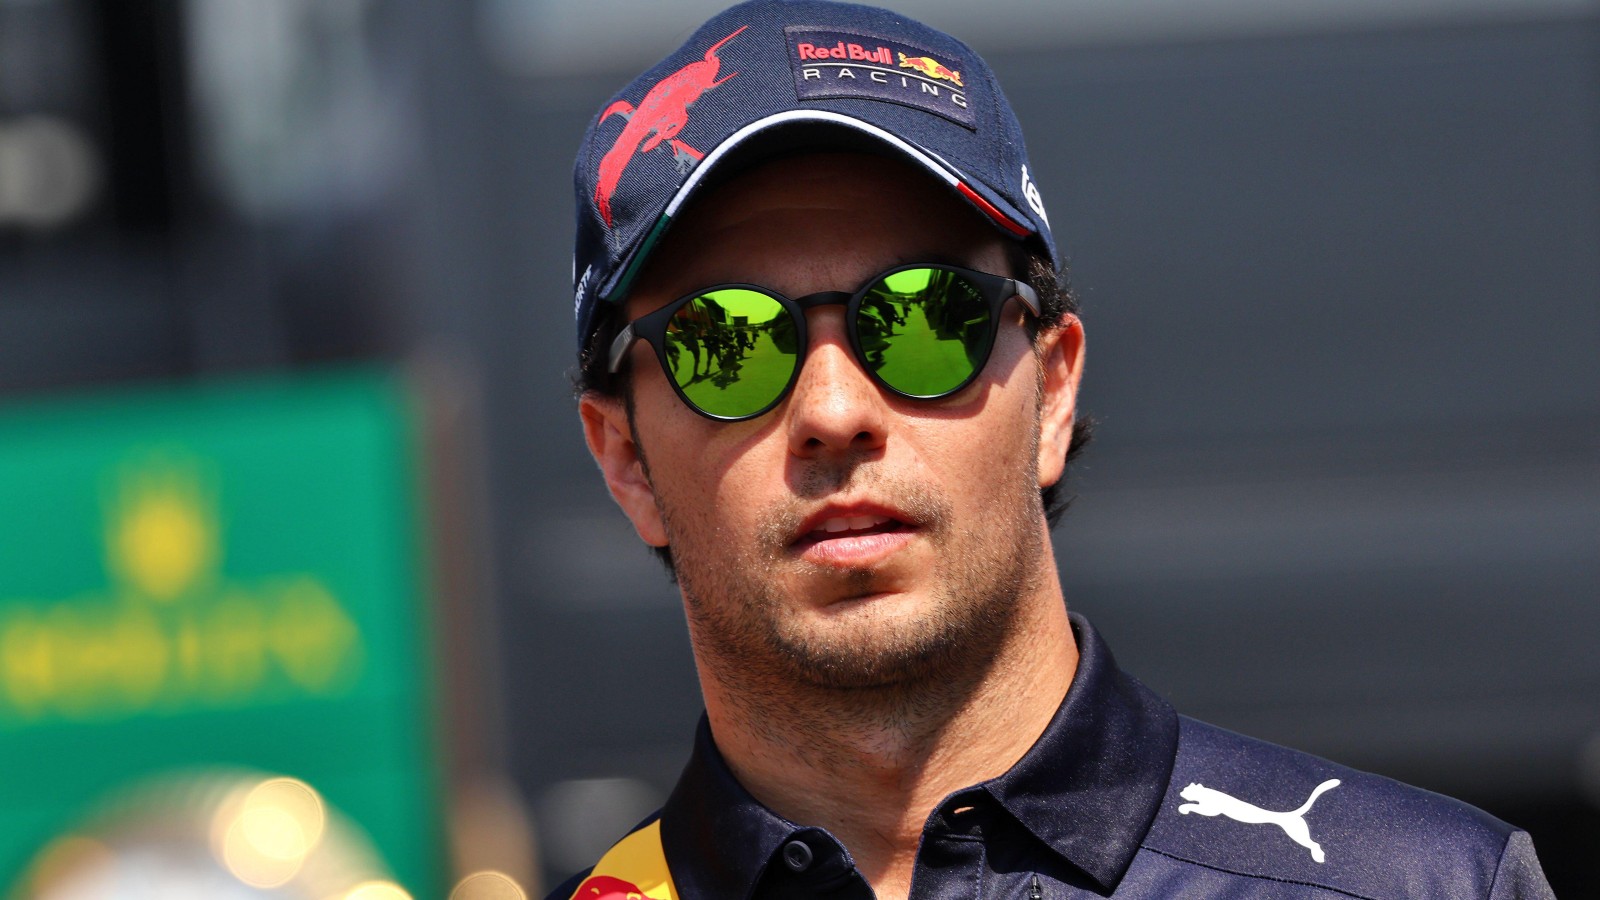 Sergio Perez wears Red Bull gear and sunglasses. France, July 2022.